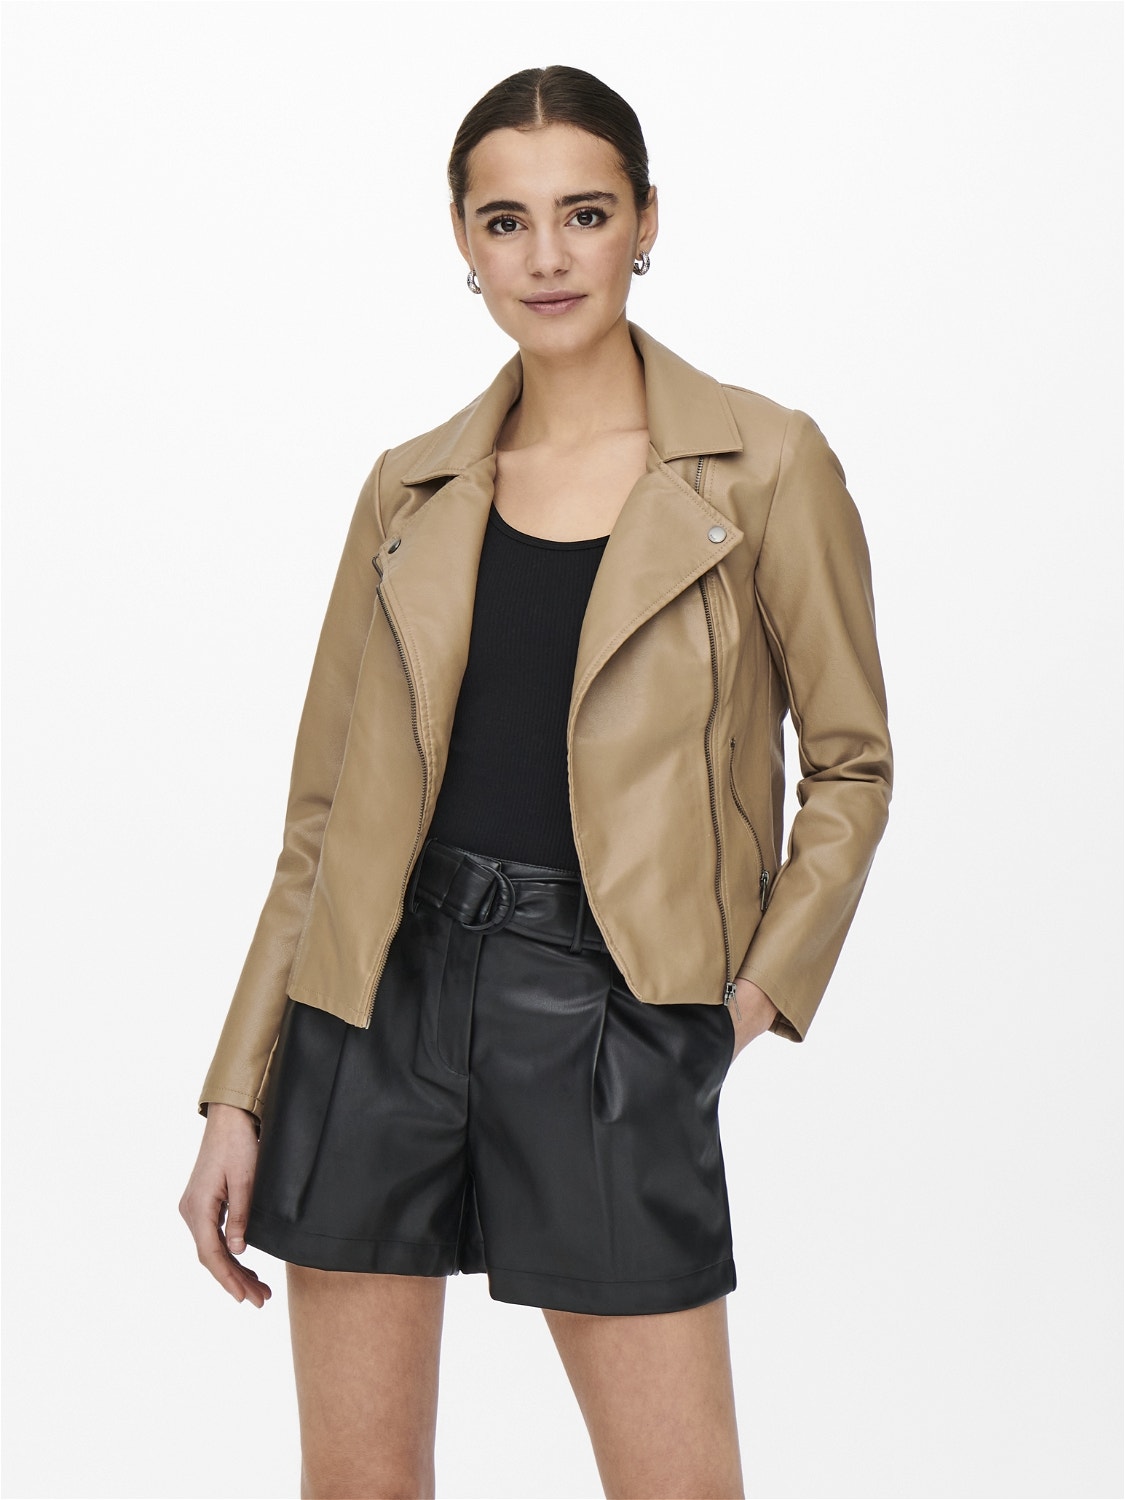 20% ONLY® | Jacket Biker discount! Leather Faux with